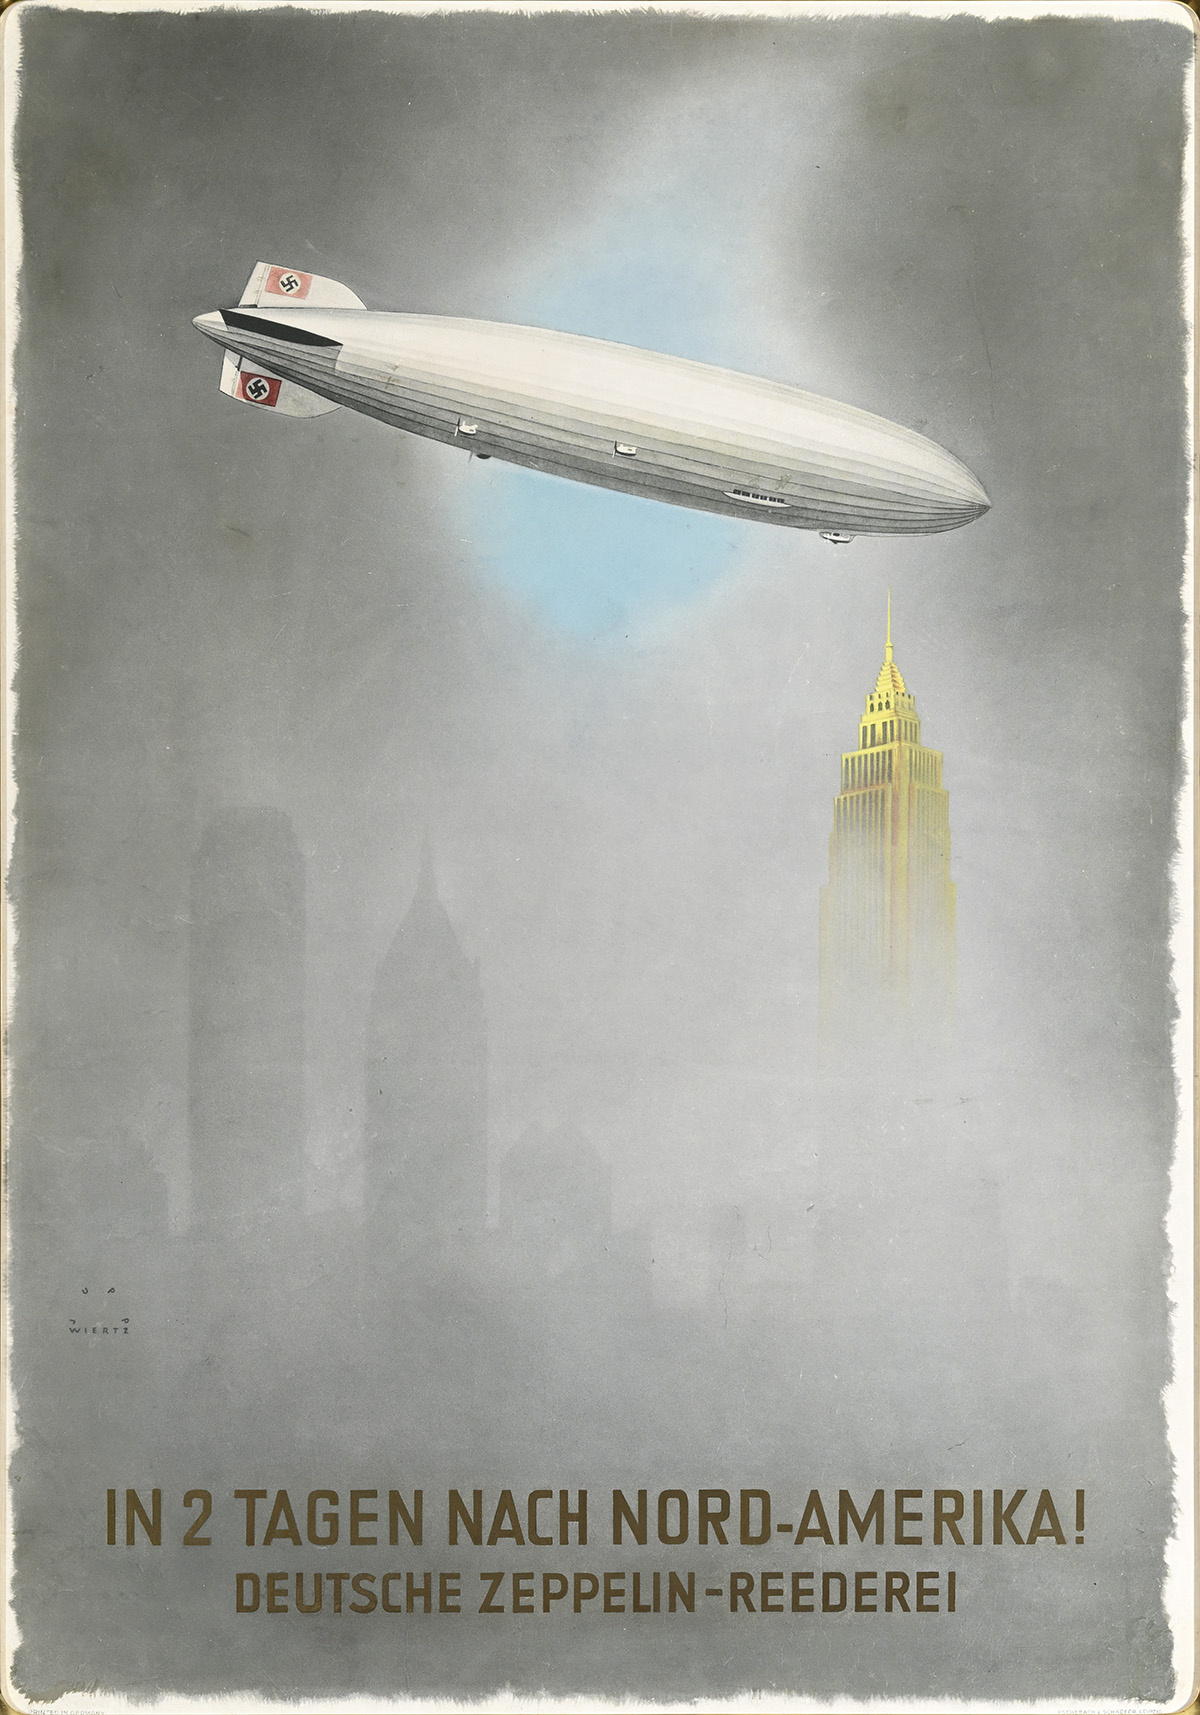 A poster of an airship with Nazi swastikas on its tail flying through clouds towards a skyscraper.